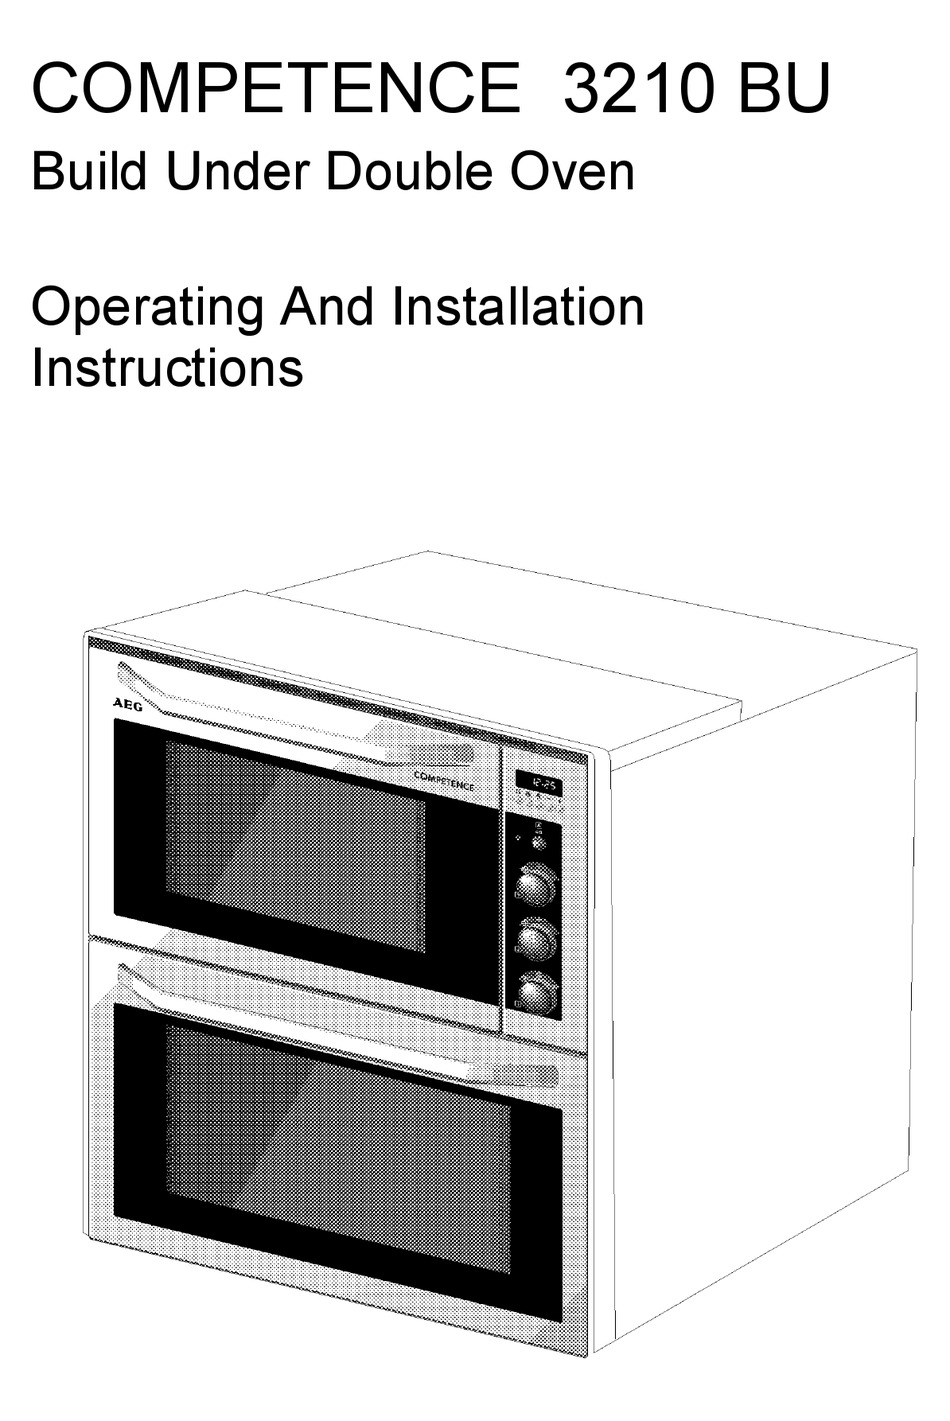 COMPETENCE 3210 BU OPERATING AND INSTALLATION INSTRUCTIONS Pdf Download |